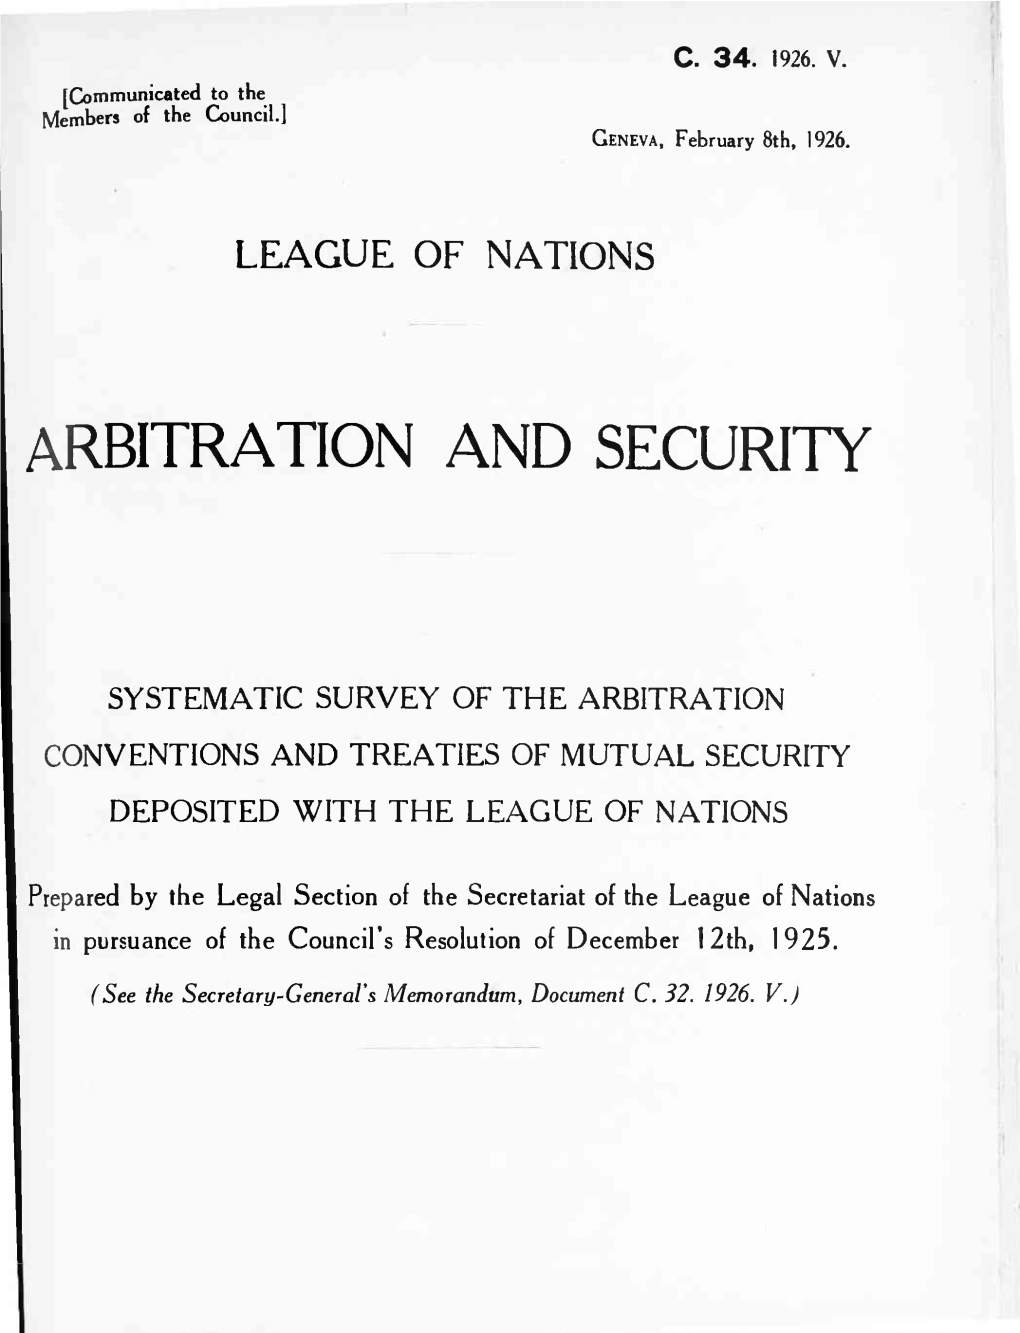 Arbitration and Security